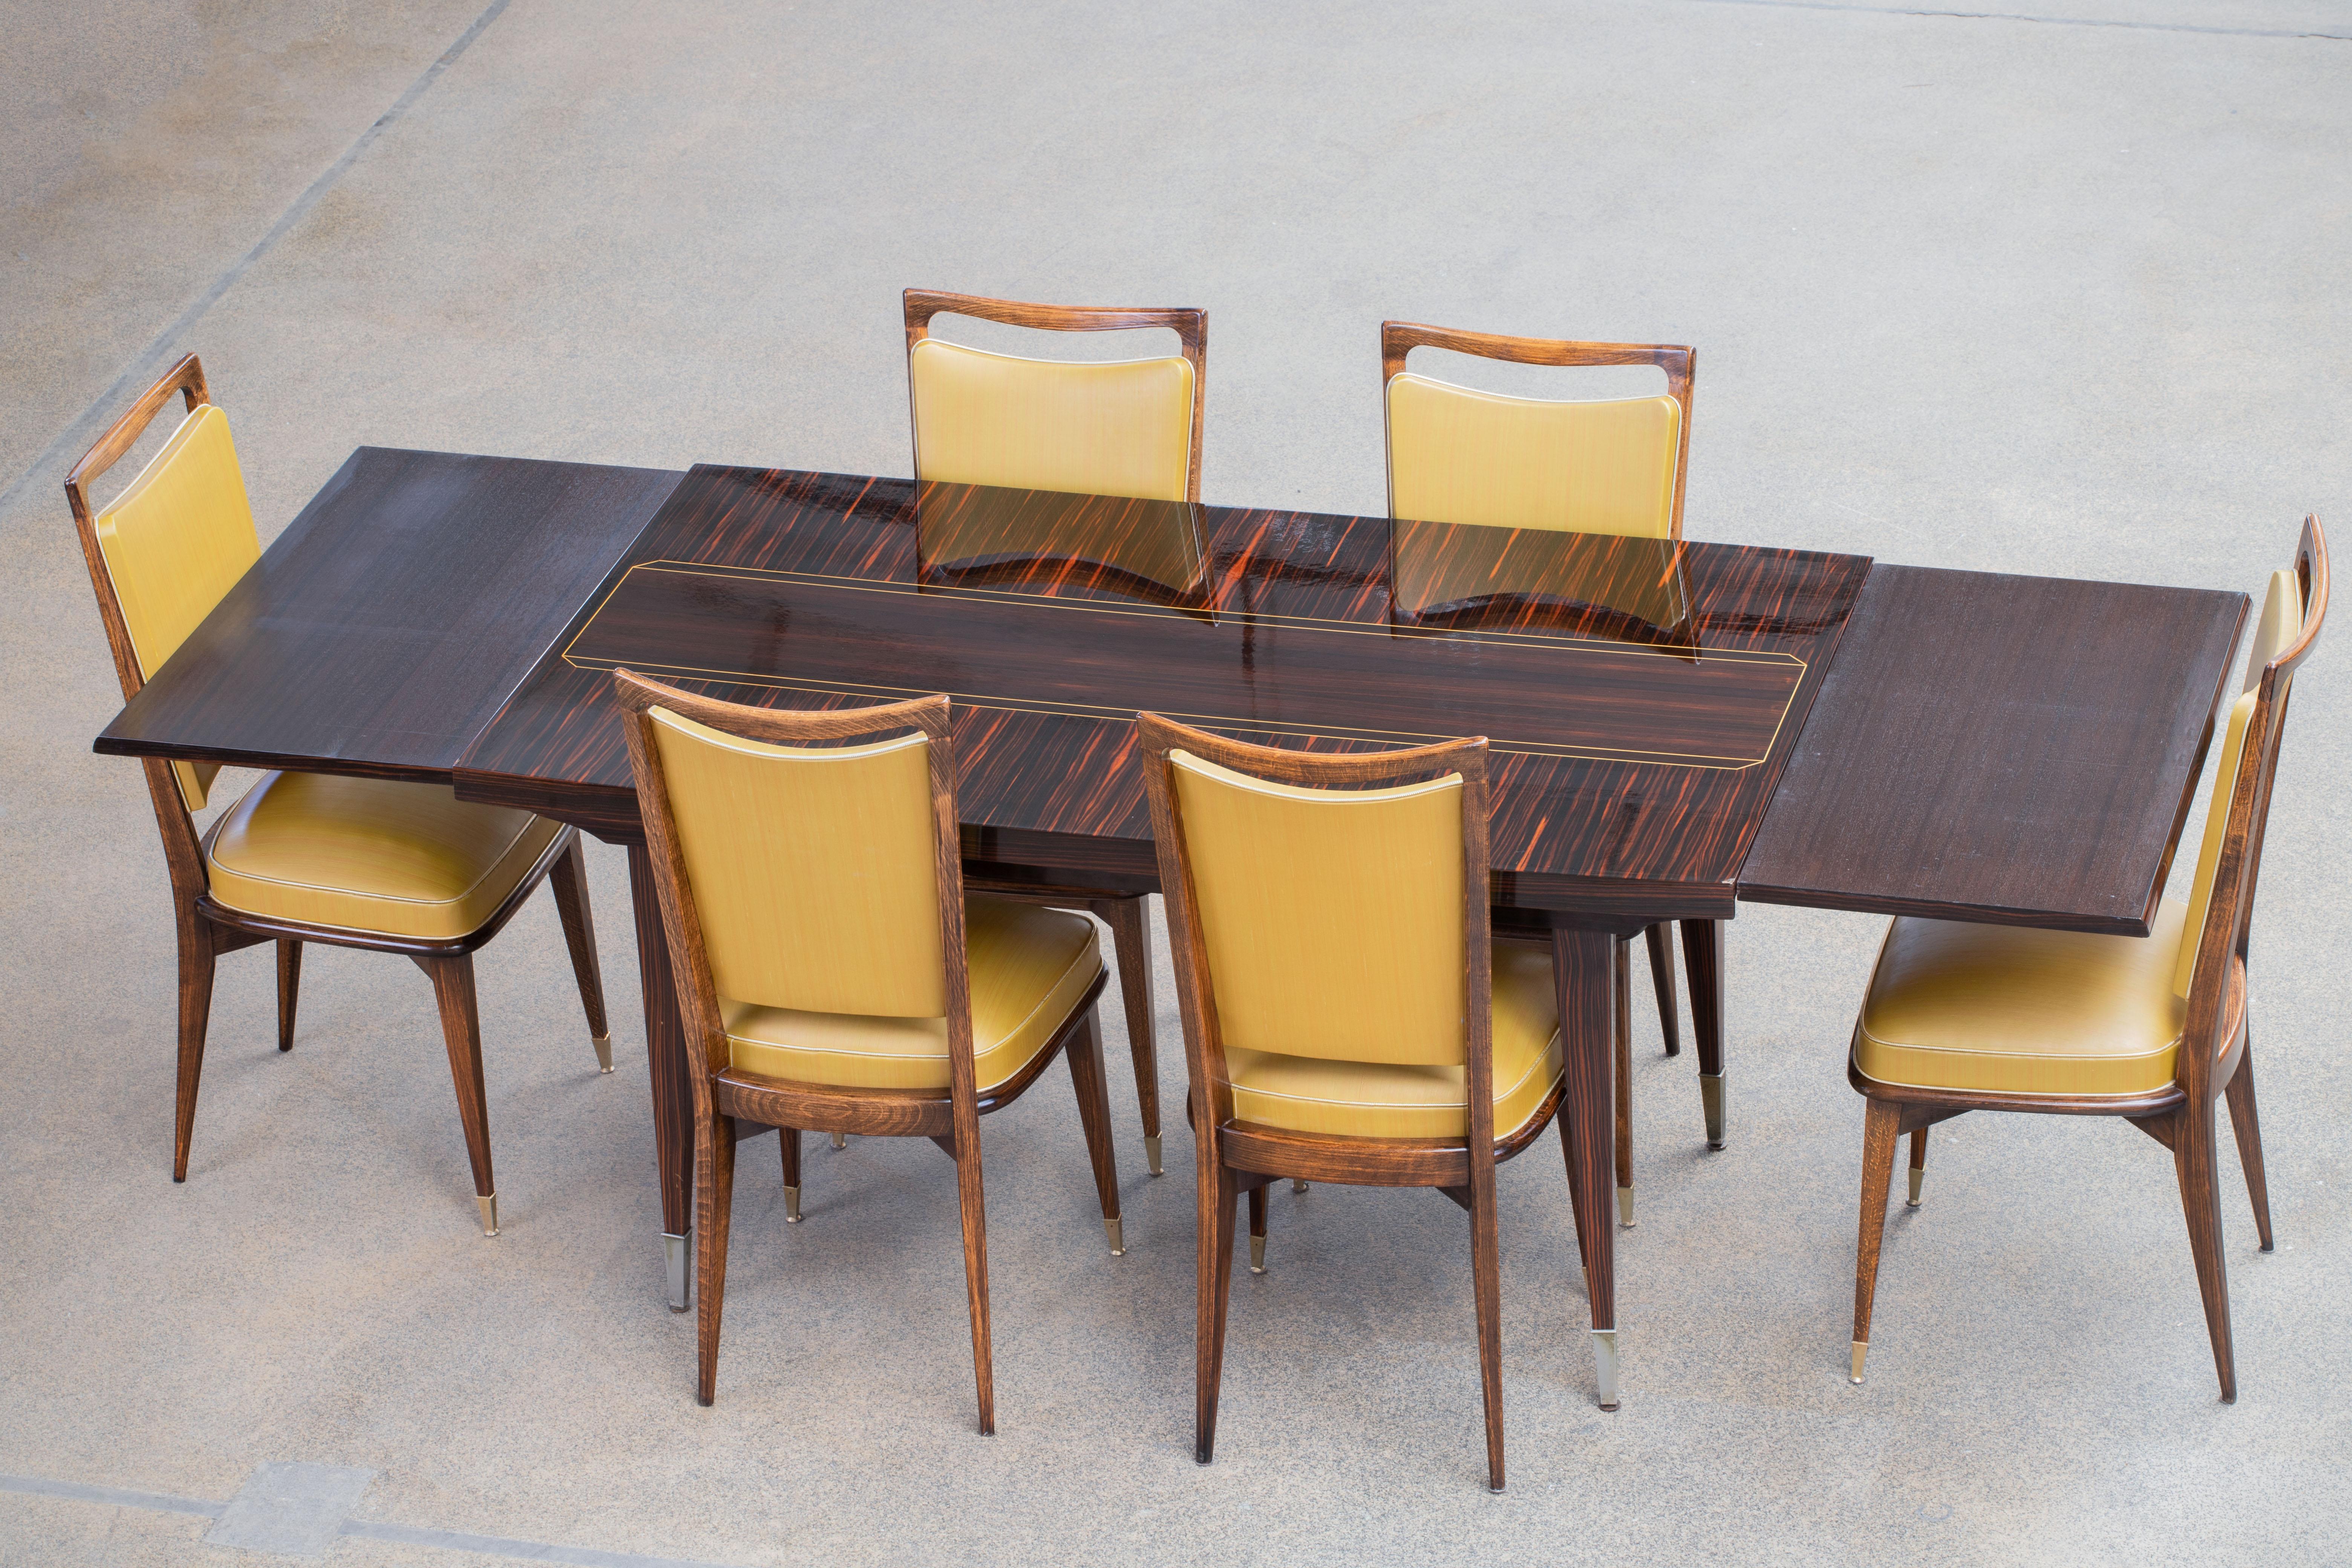 Dining table, Macassar, France, 1940s.

Majestic centre table in Macassar. This Art Deco table shows great craftsmanship. The base and legs are beautifully detailed. This table has an elegant appearance. This design combines the more feminine and